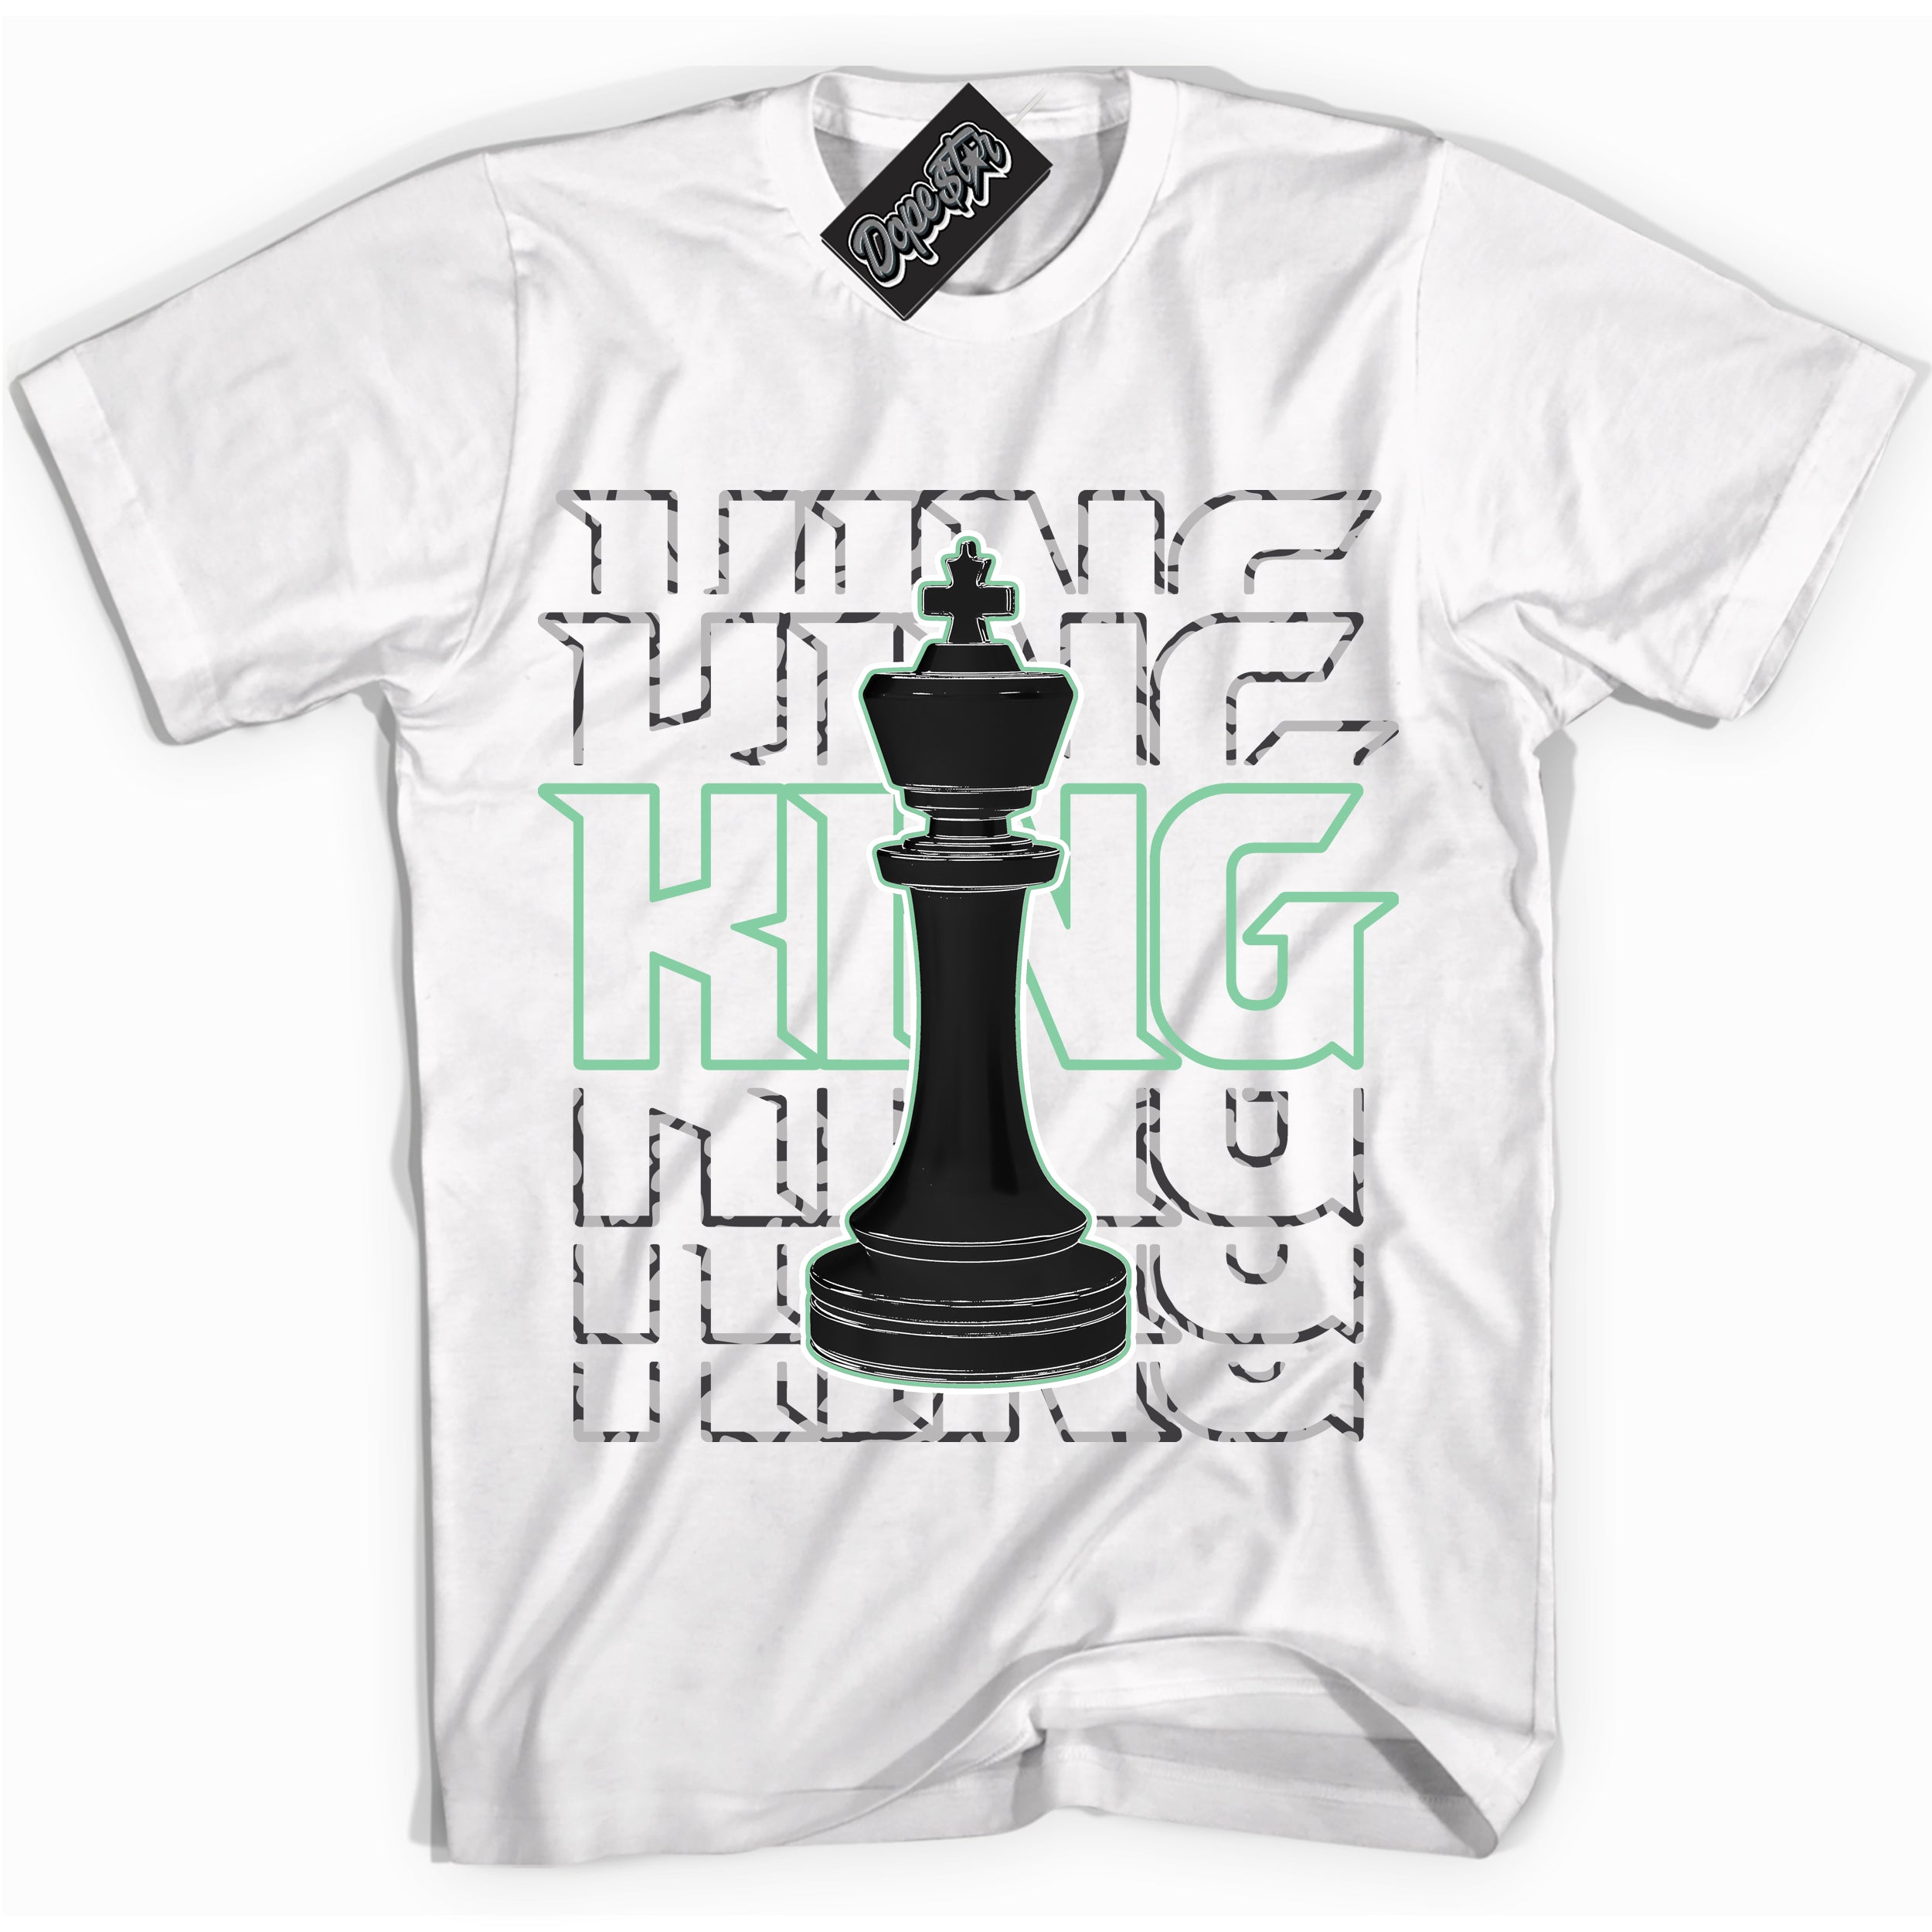 Cool White graphic tee with “ King Chess ” design, that perfectly matches Green Glow 3s sneakers 